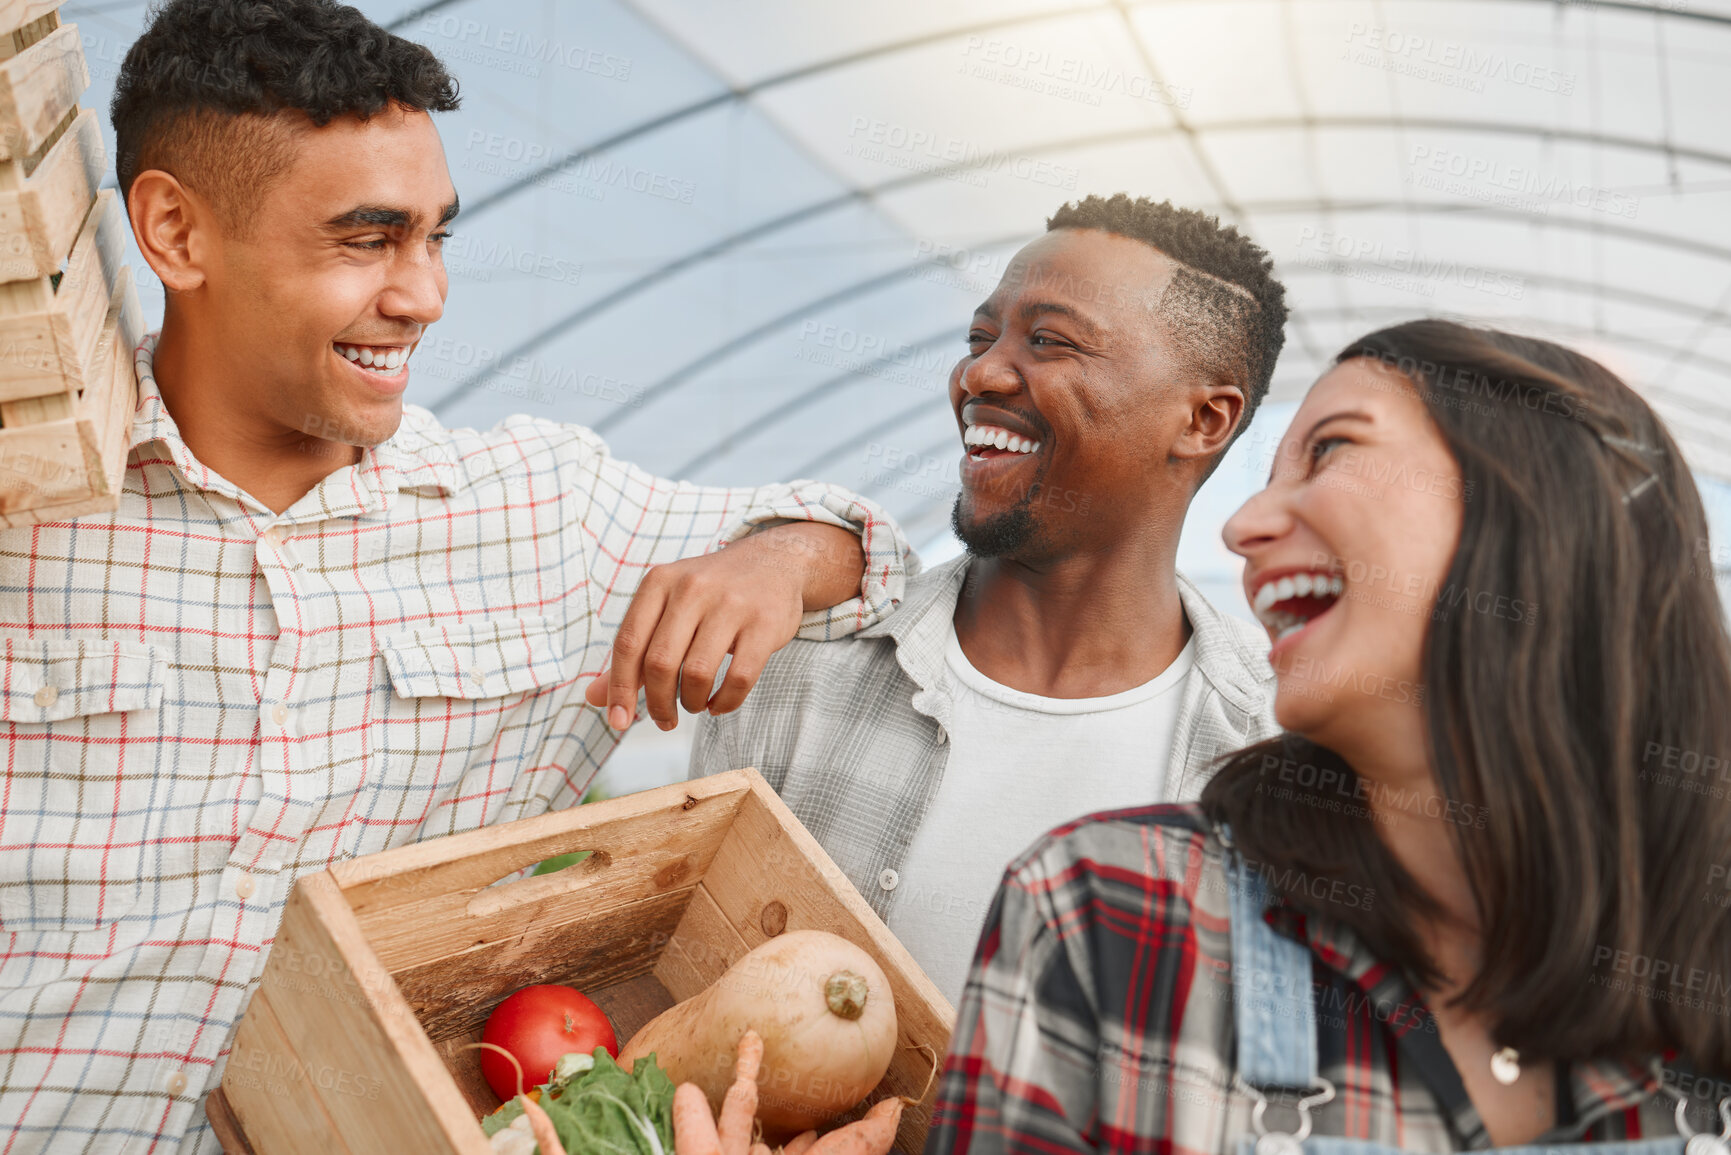 Buy stock photo Shot of a group of people holding crates of fresh produce while working together on a farm